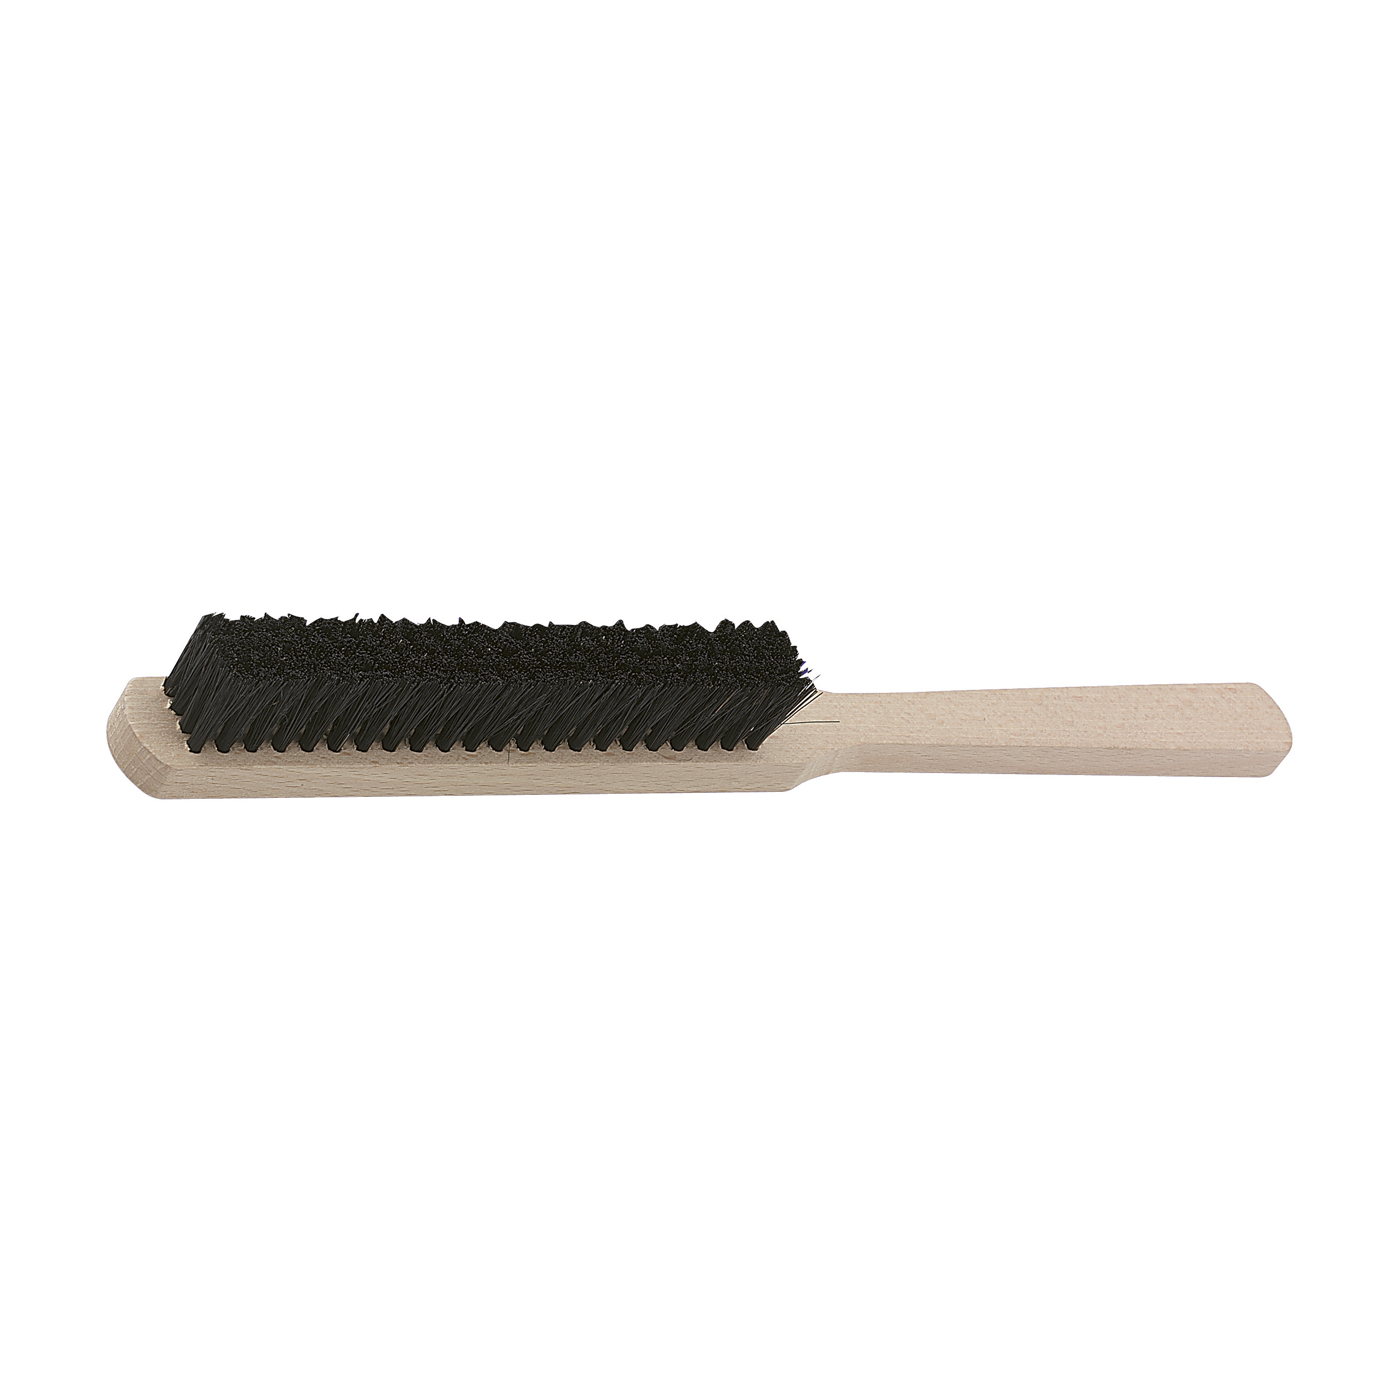 Washout Brush, 4 Rows, 280 mm - 1 piece